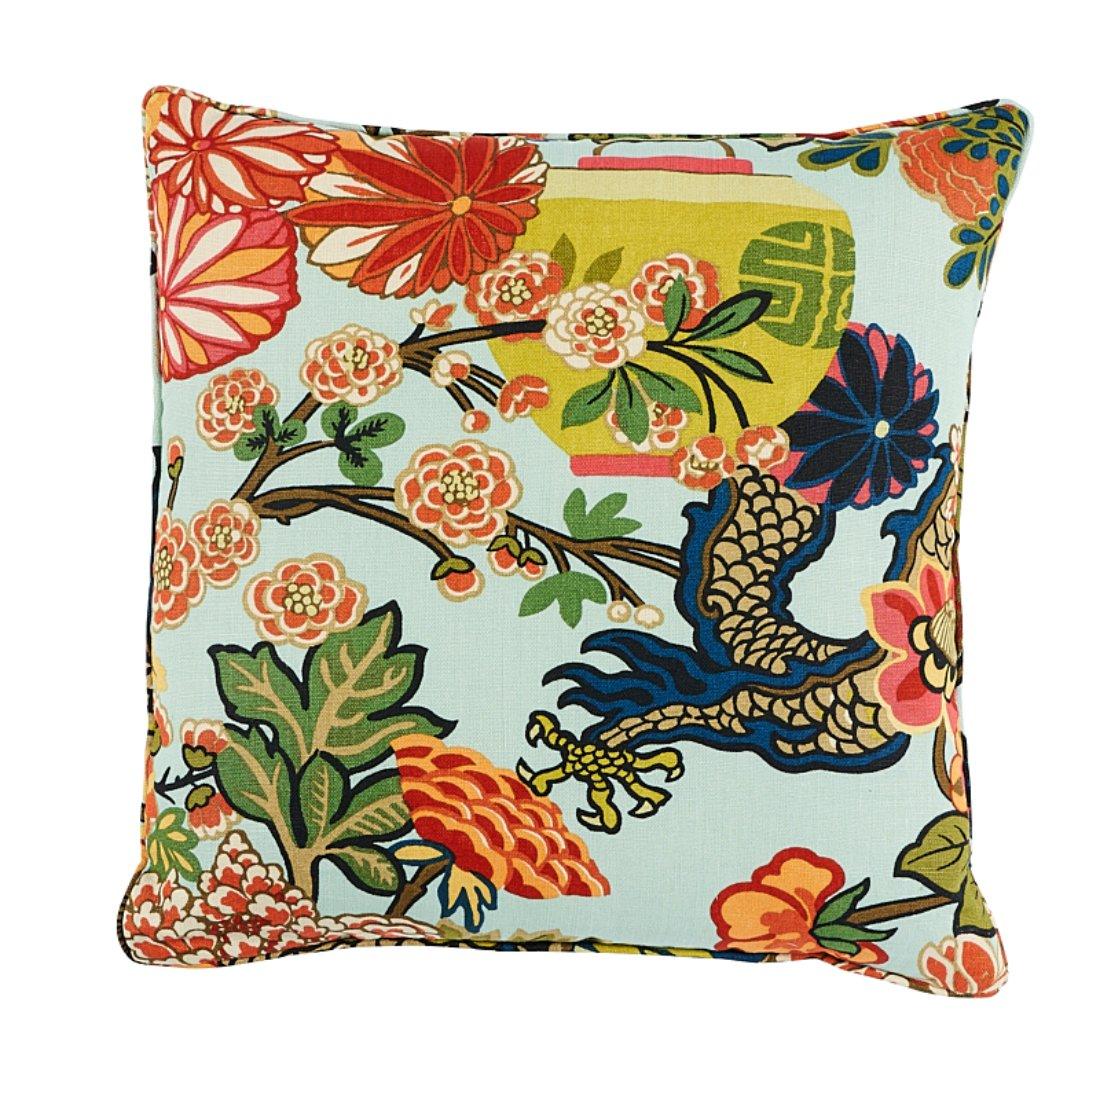 This pillow features Chiang Mai Dragon with a Self-Welt finish. An instant hit from the moment we introduced it, this is one of our best-loved designs. The chinoiserie motif was inspired by an Art Deco print. Pillow includes a feather/down fill